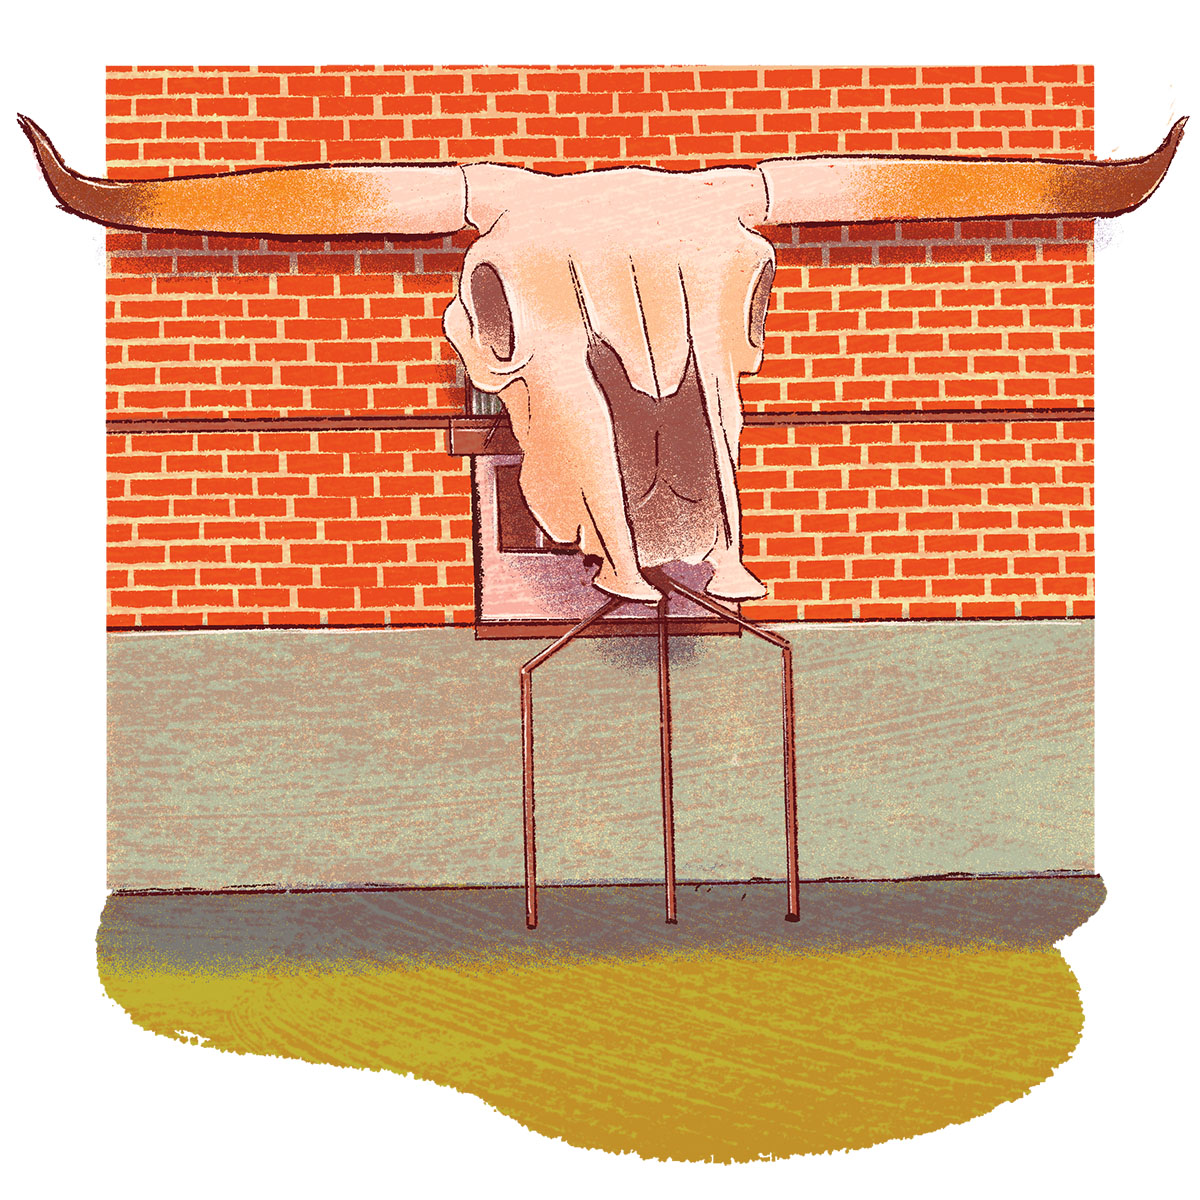 An illustration of a large longhorn skull on a brick wall